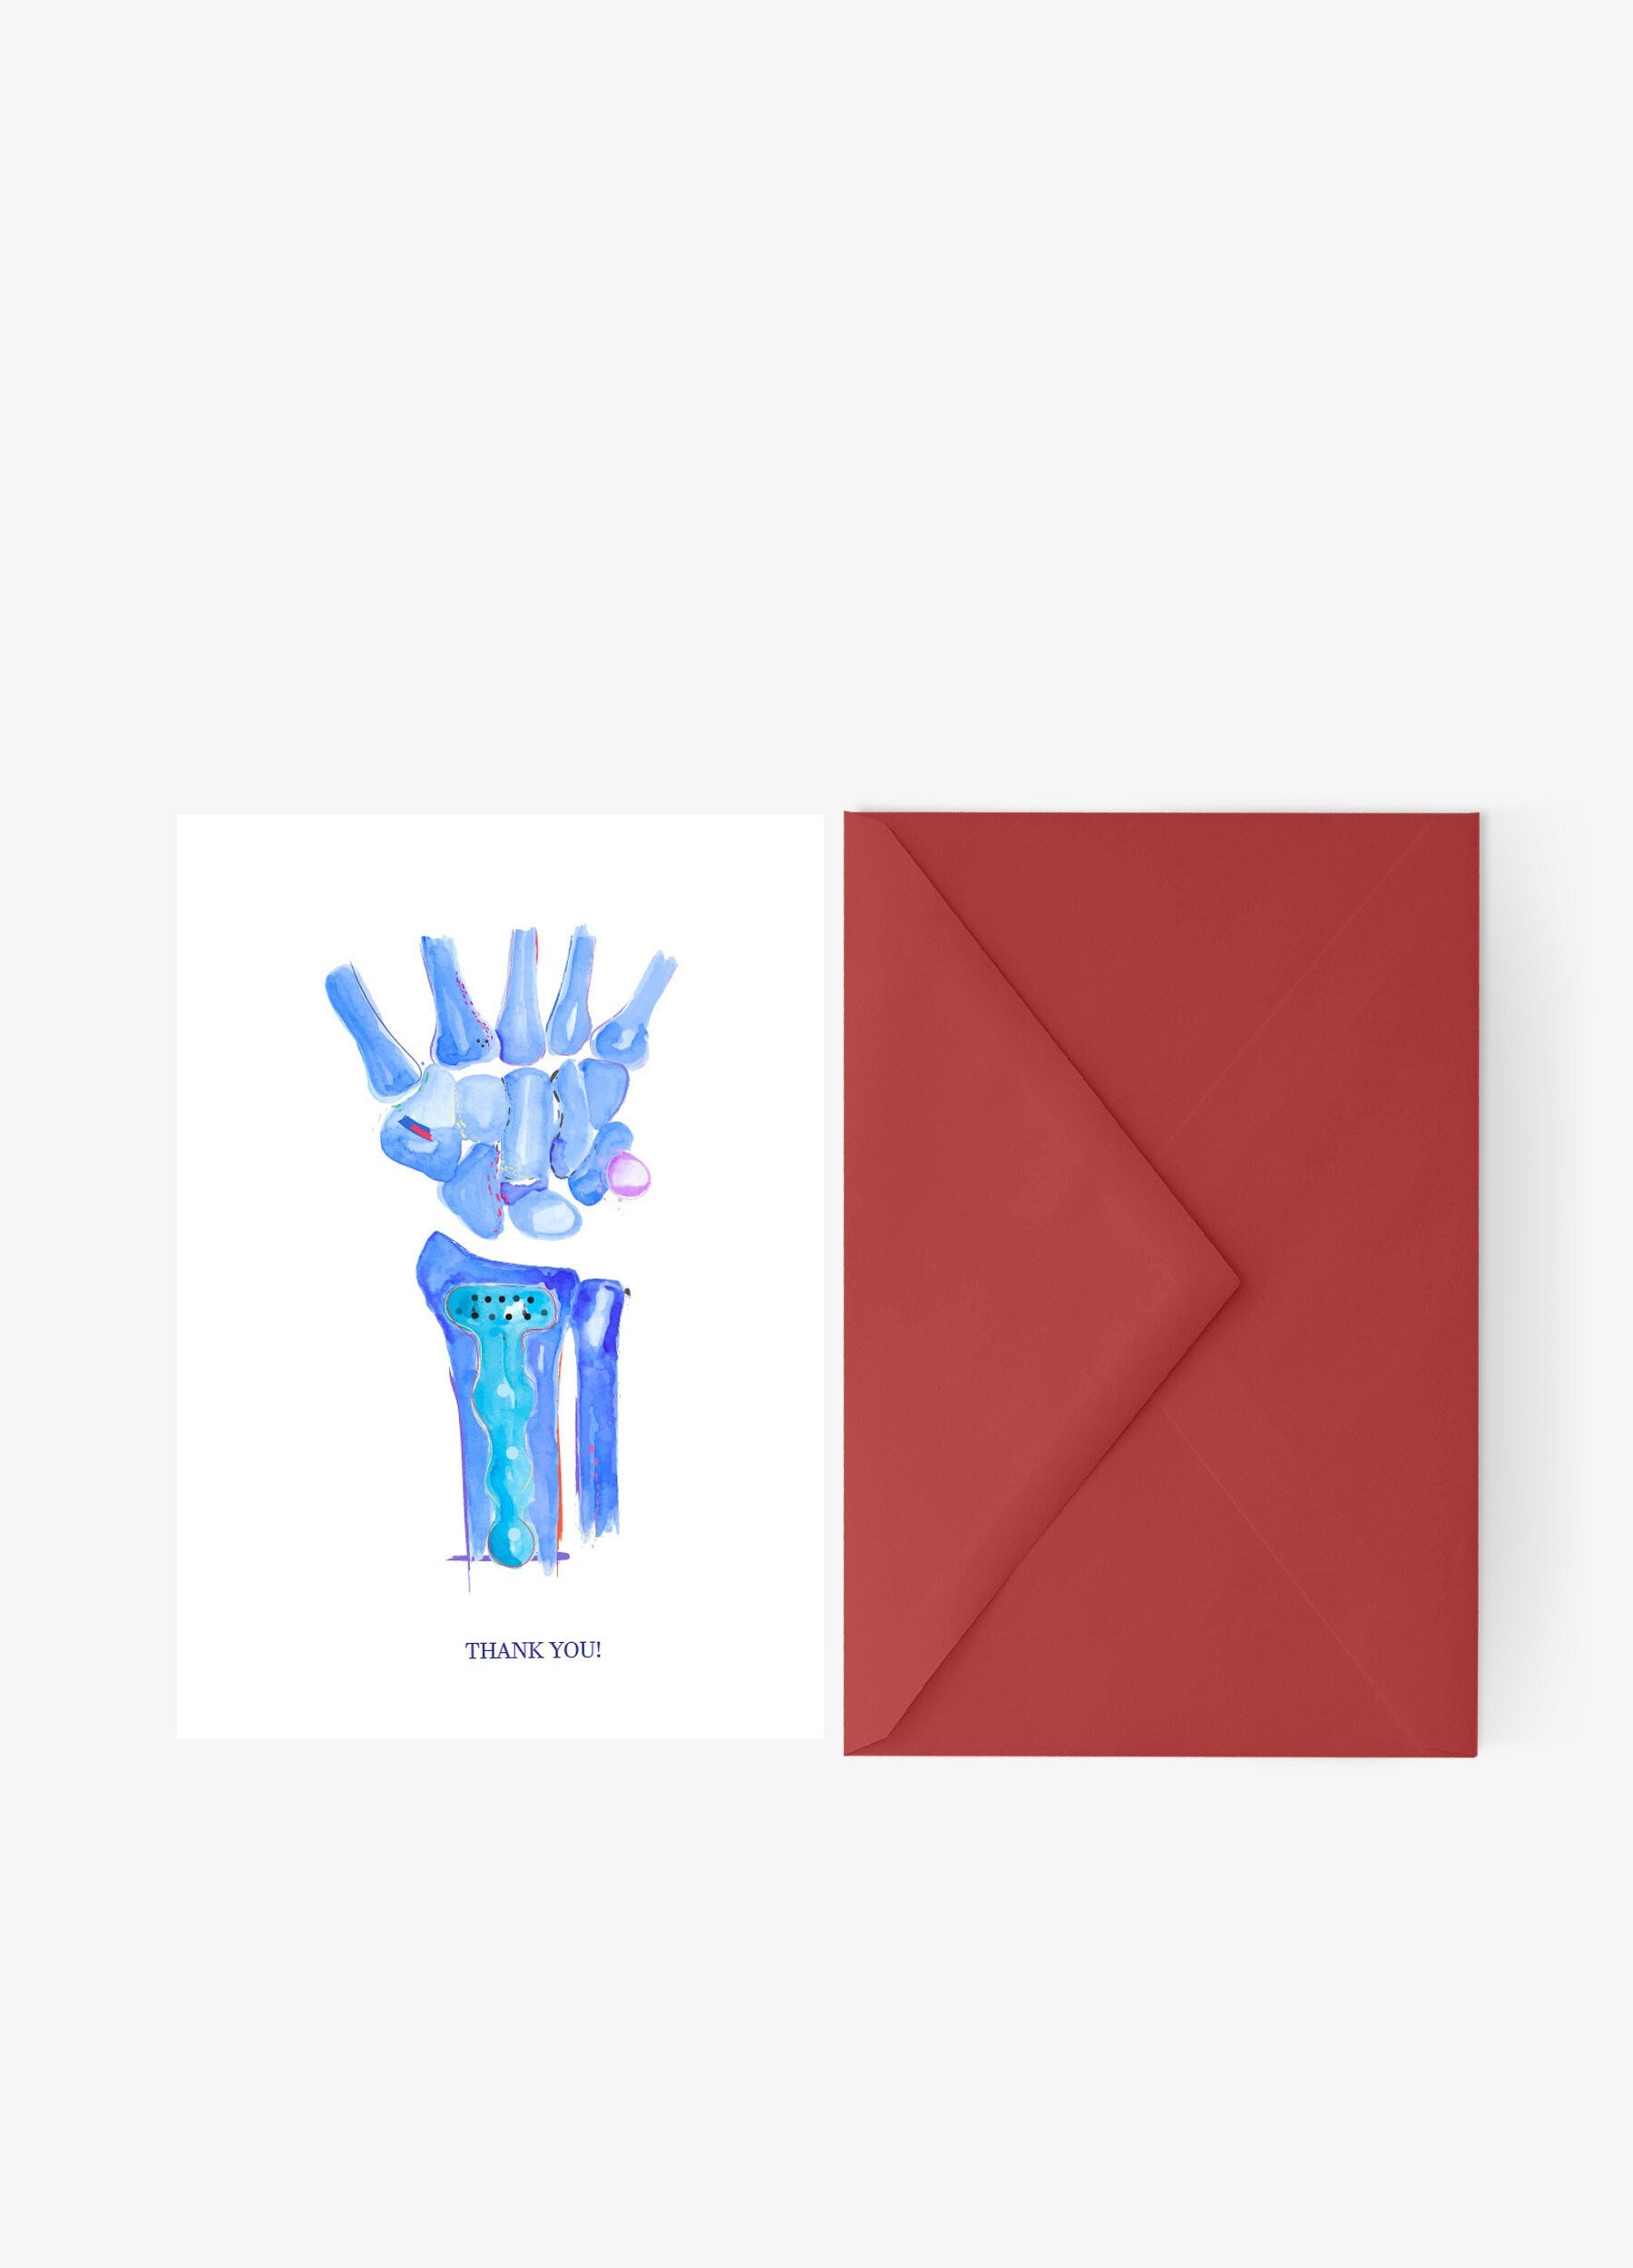 Orthopedic Surgeon Gift, Physical Therapy Thank You Card, Physical Therapist, Hand and Wrist Anatomy, Orthopedics Nurse, Orthopedic Gift